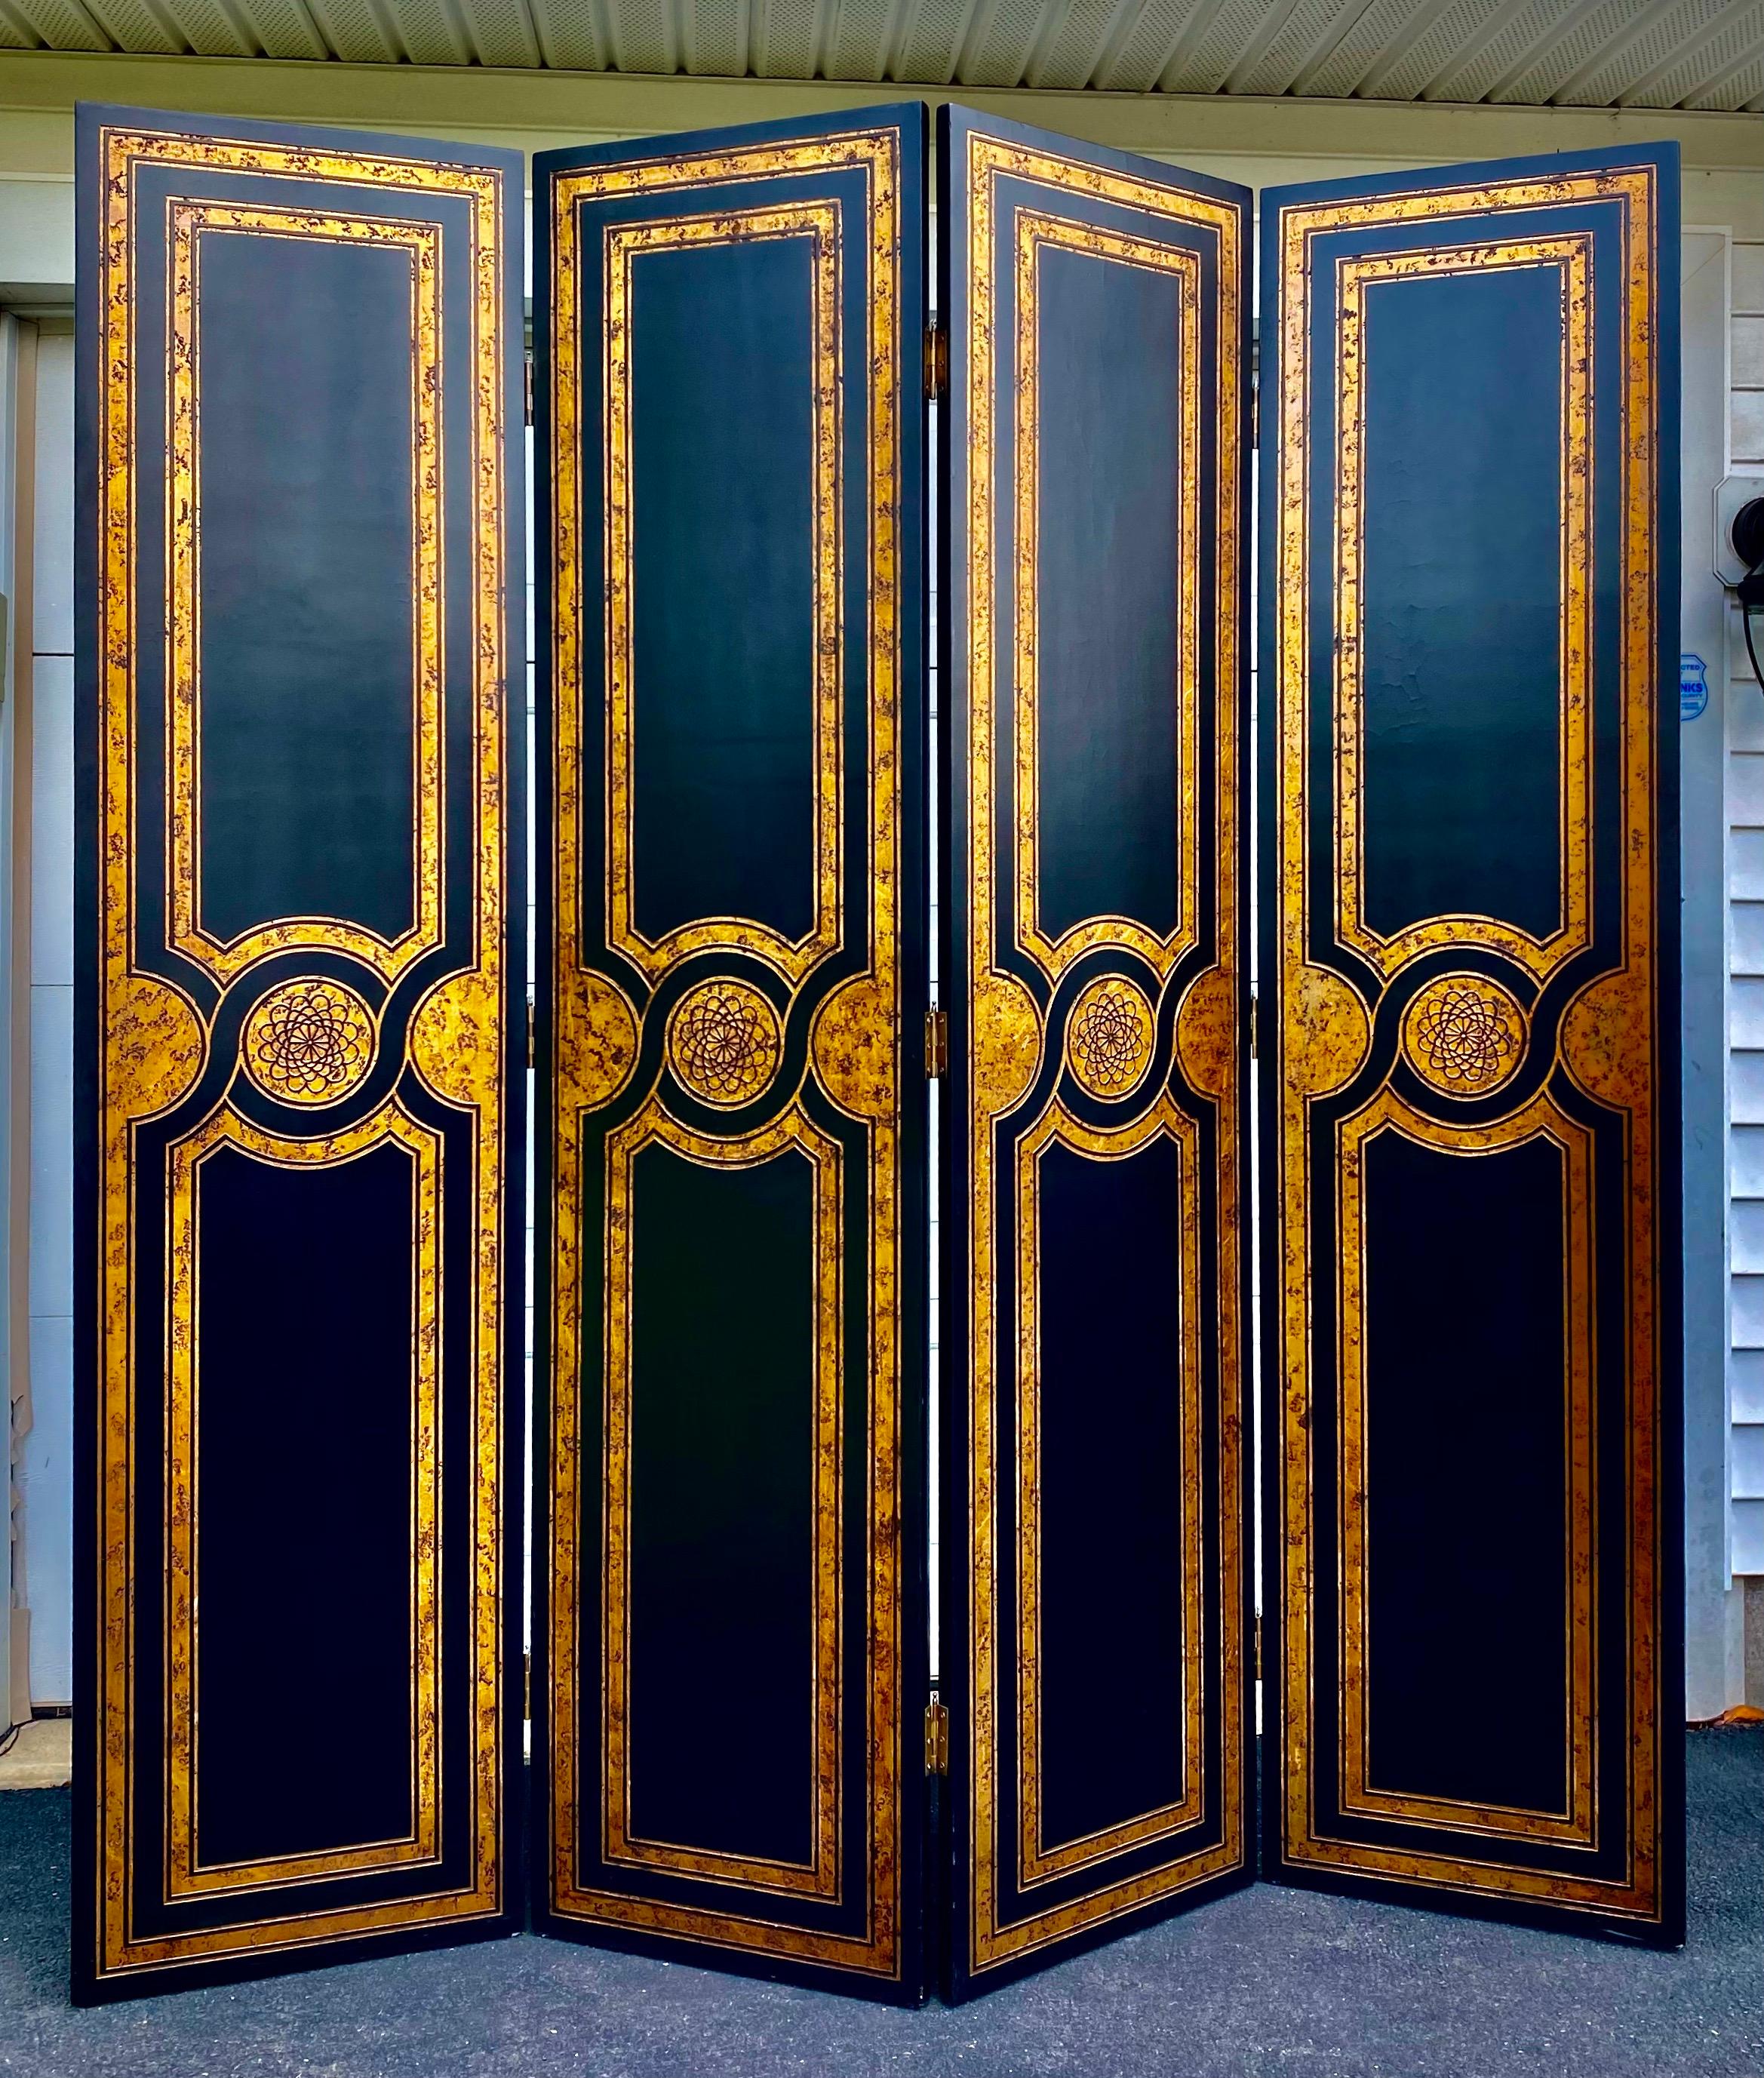 Large Hollywood Regency style four panel decorative floor screen. This tall room divider features a black and gold tortoise-like finish with carved medallions and border details. Back side is solid black. In the style of Maitland Smith.